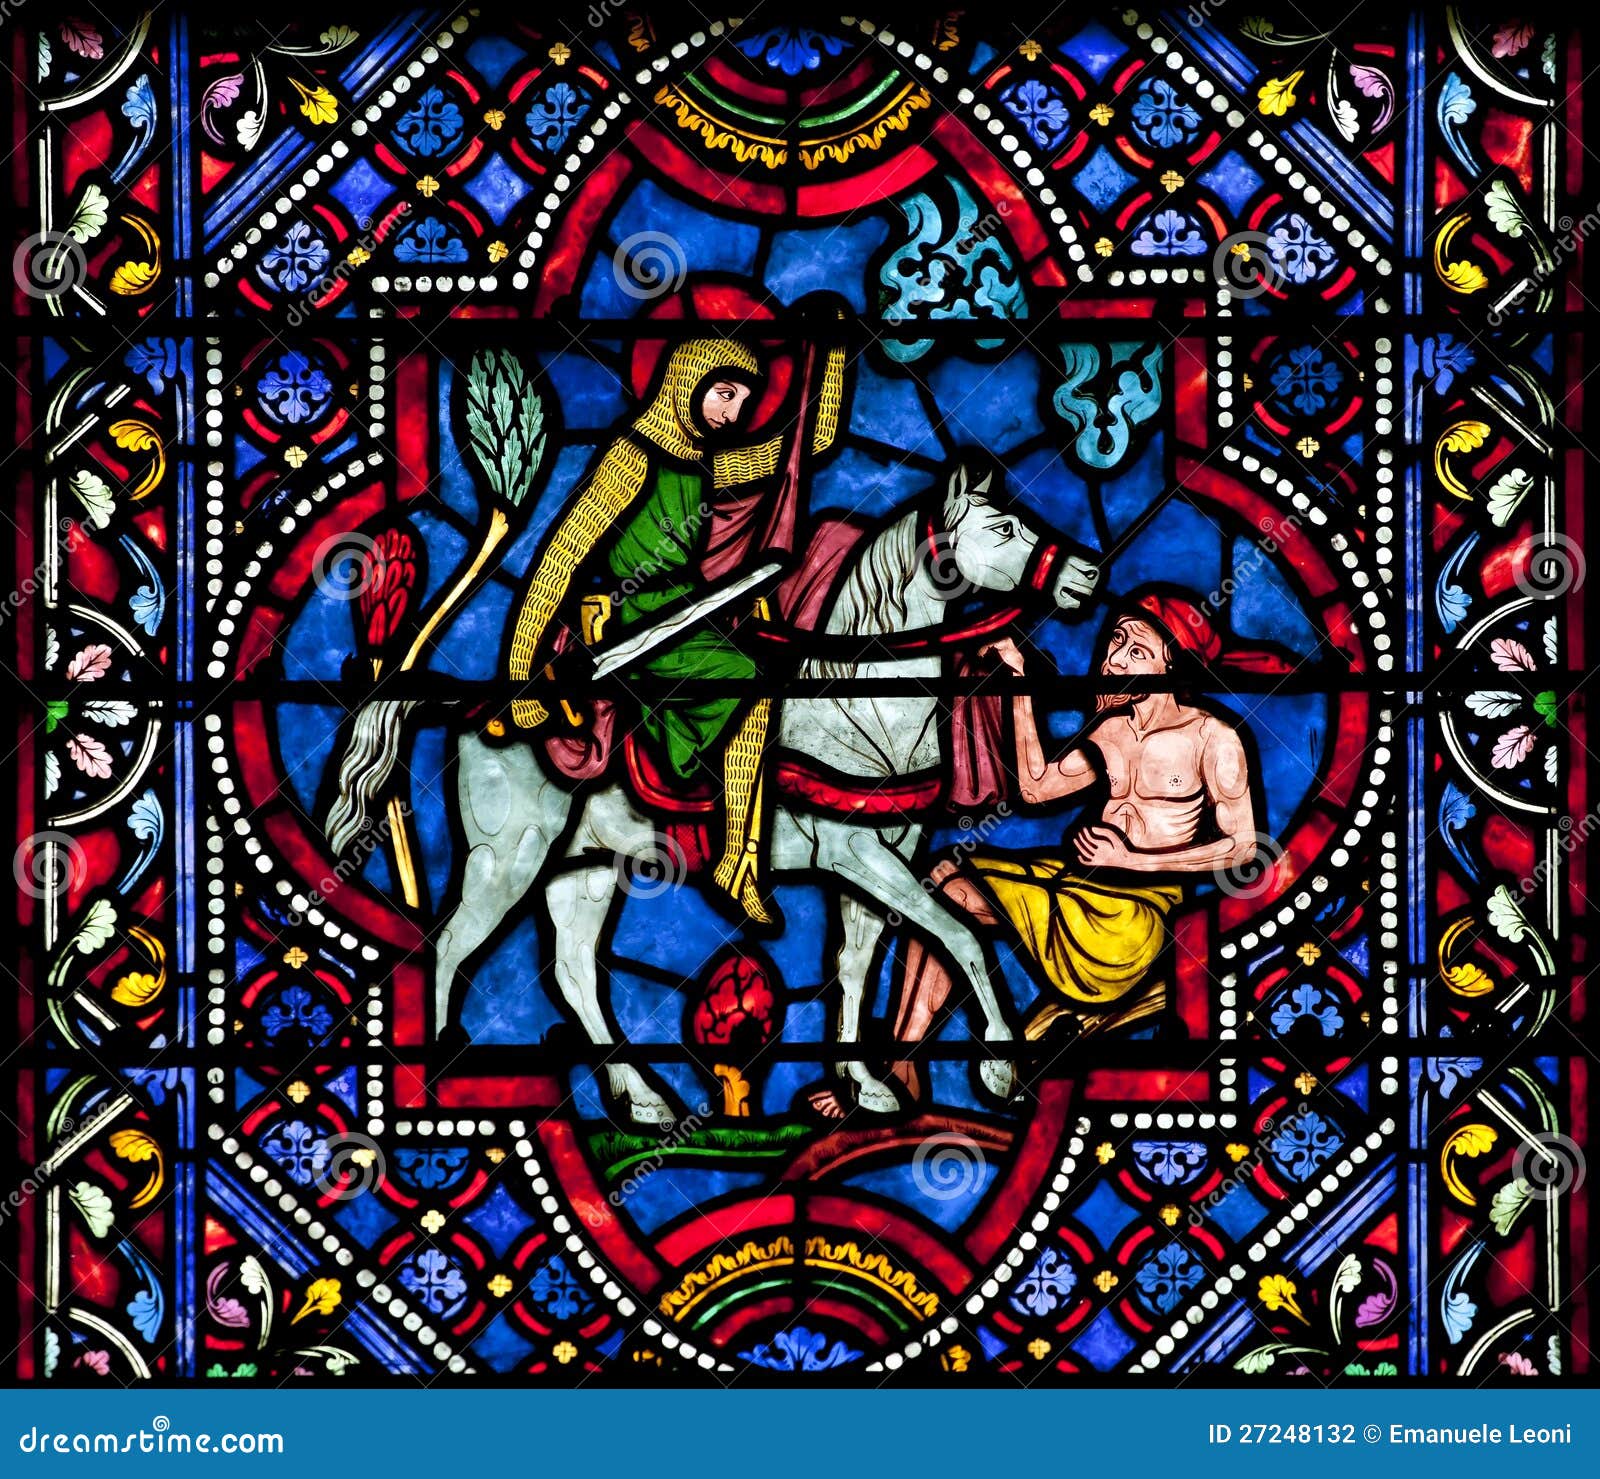 saint martin of tours stained glass